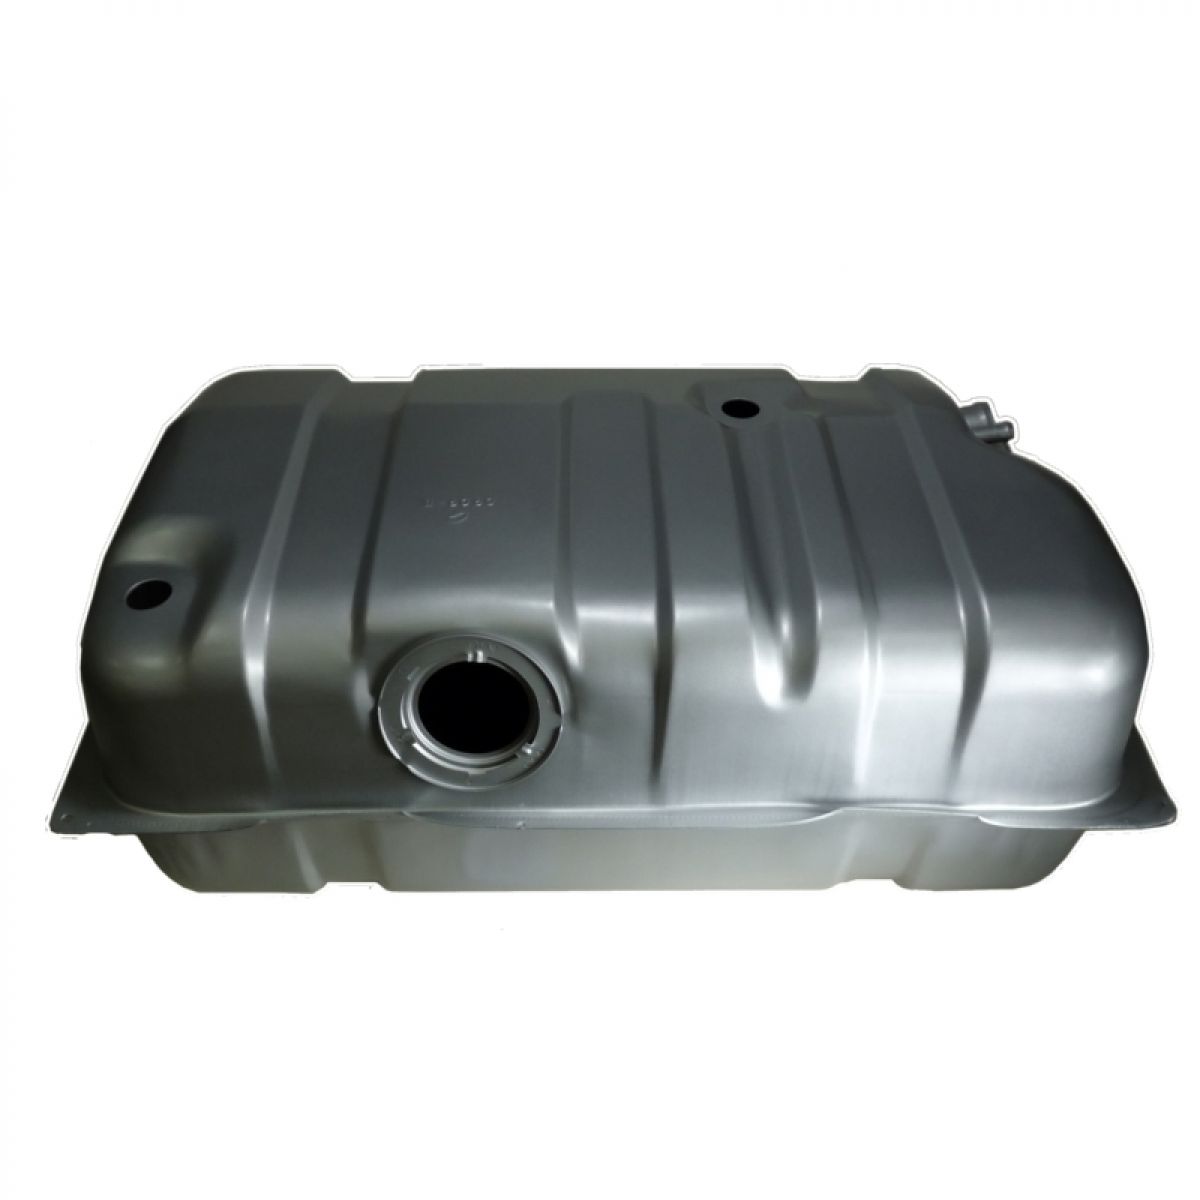 Jeep fuel injection tank #1